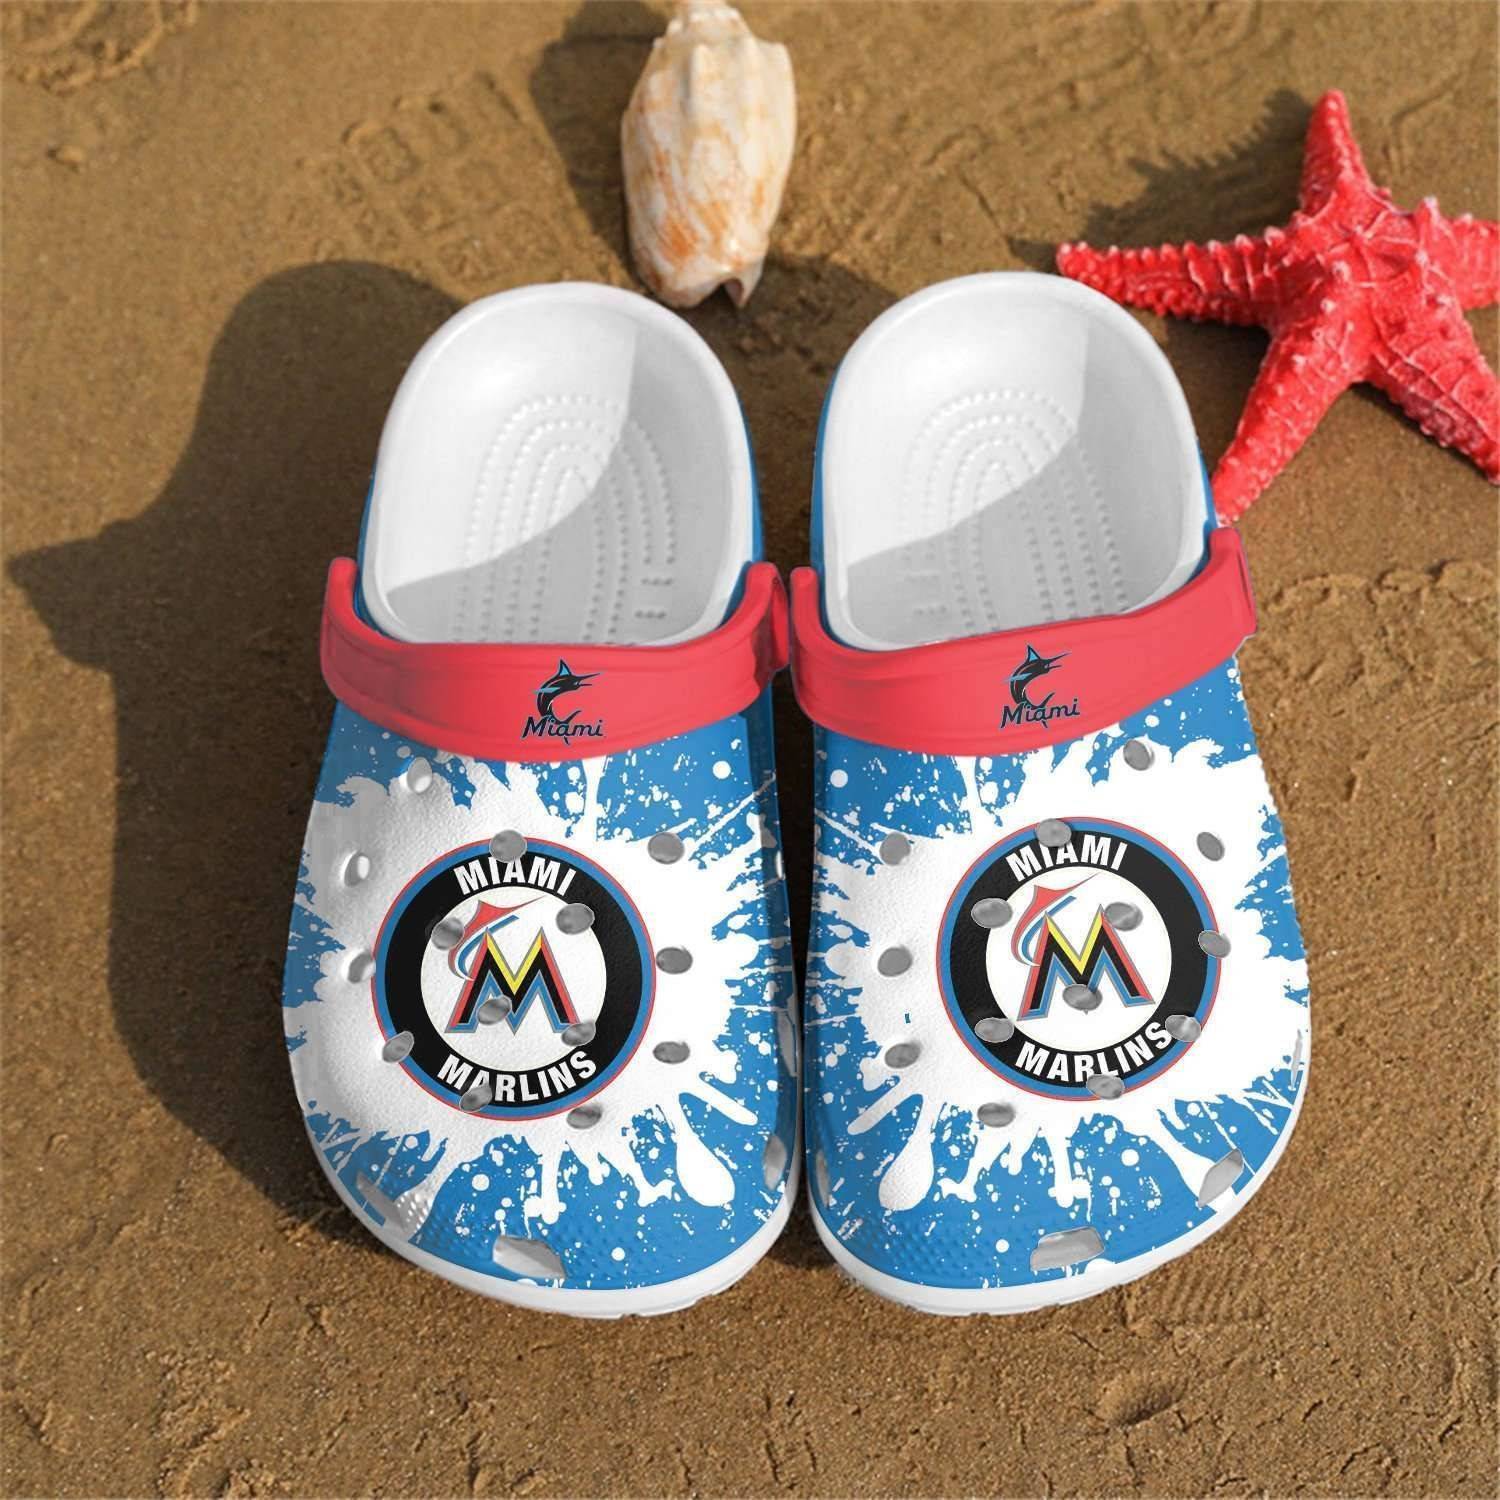 Miami Marlins Mlb Gift For Fan Crocss Clog Shoescrocband Clogs Comfy Footwear T